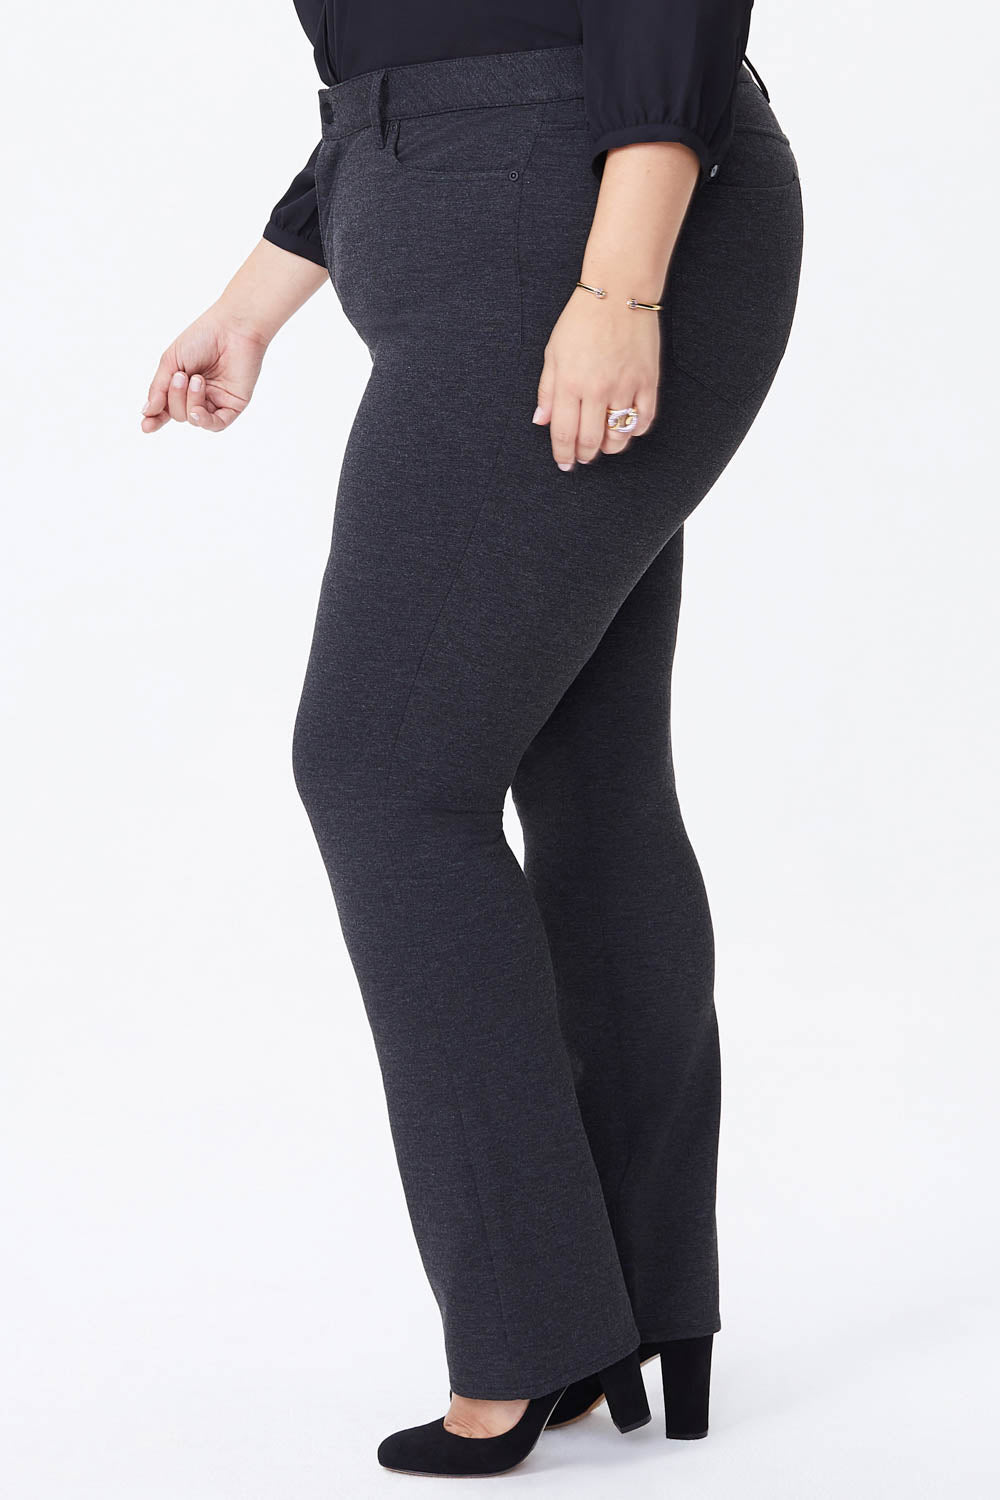 Marilyn Straight Pants In Plus Size In Ponte Knit - Charcoal Heathered Grey  | NYDJ